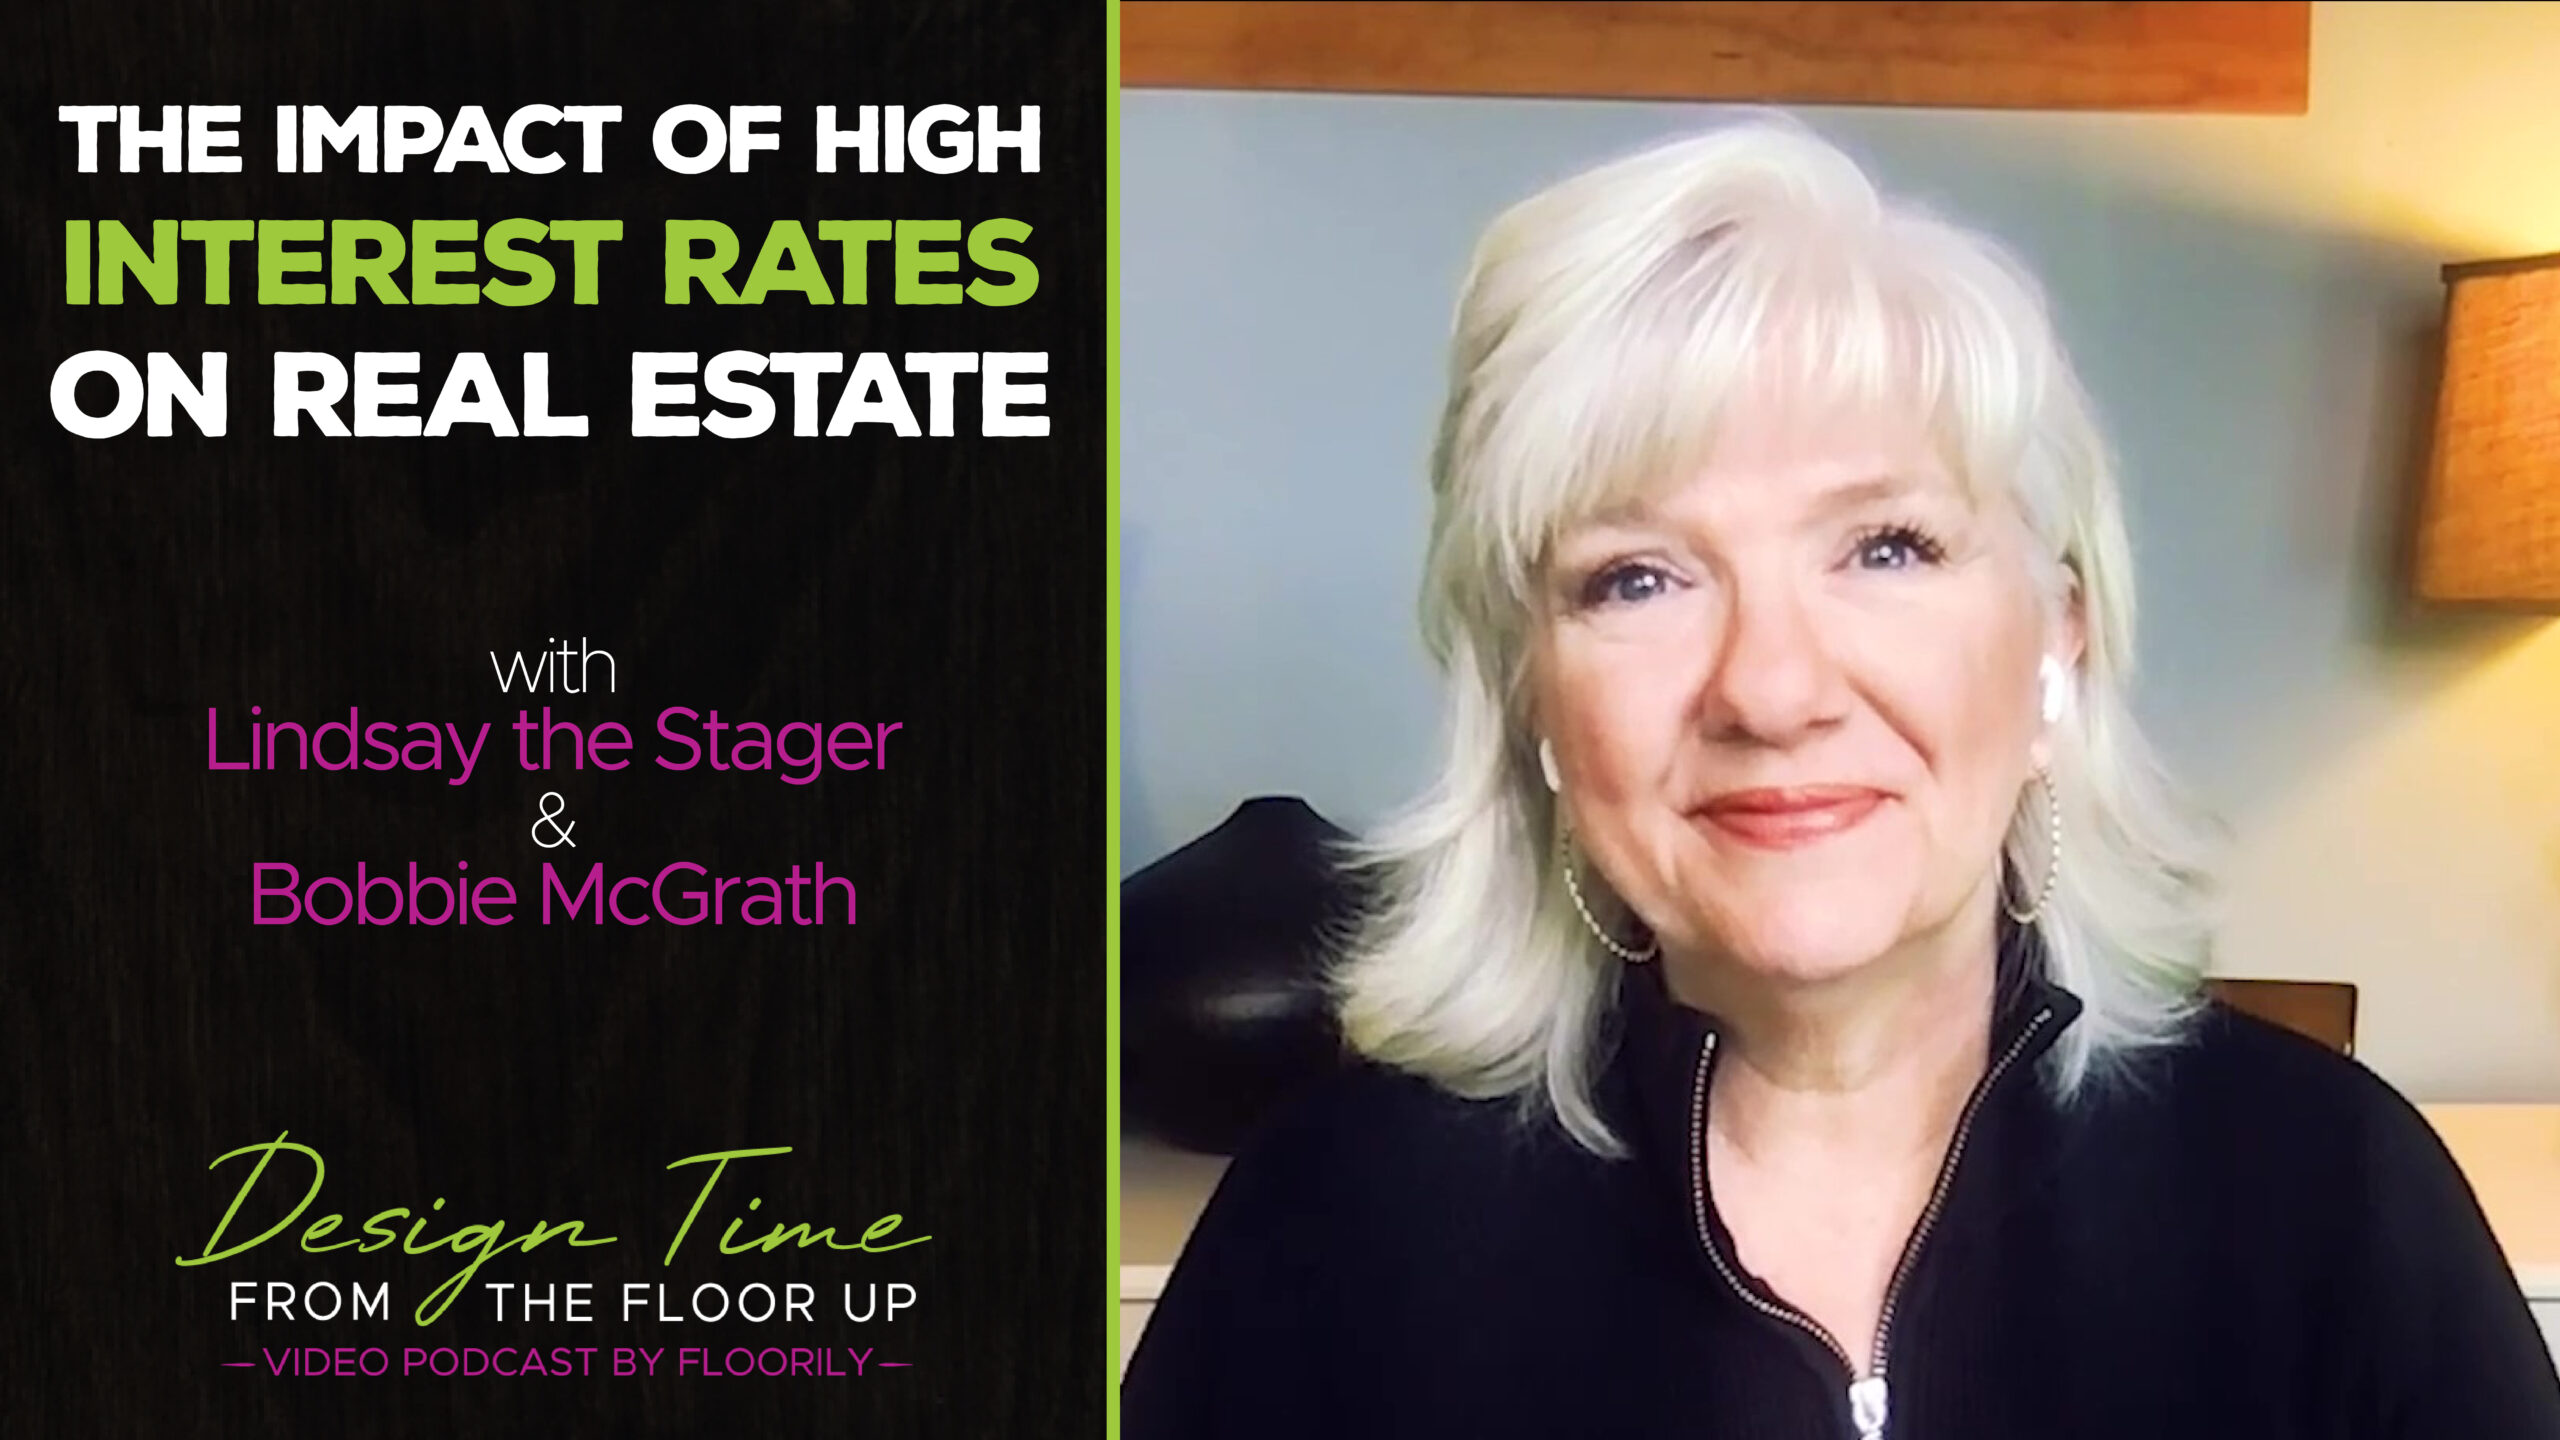 The Impact of High Interest Rates on Real Estate